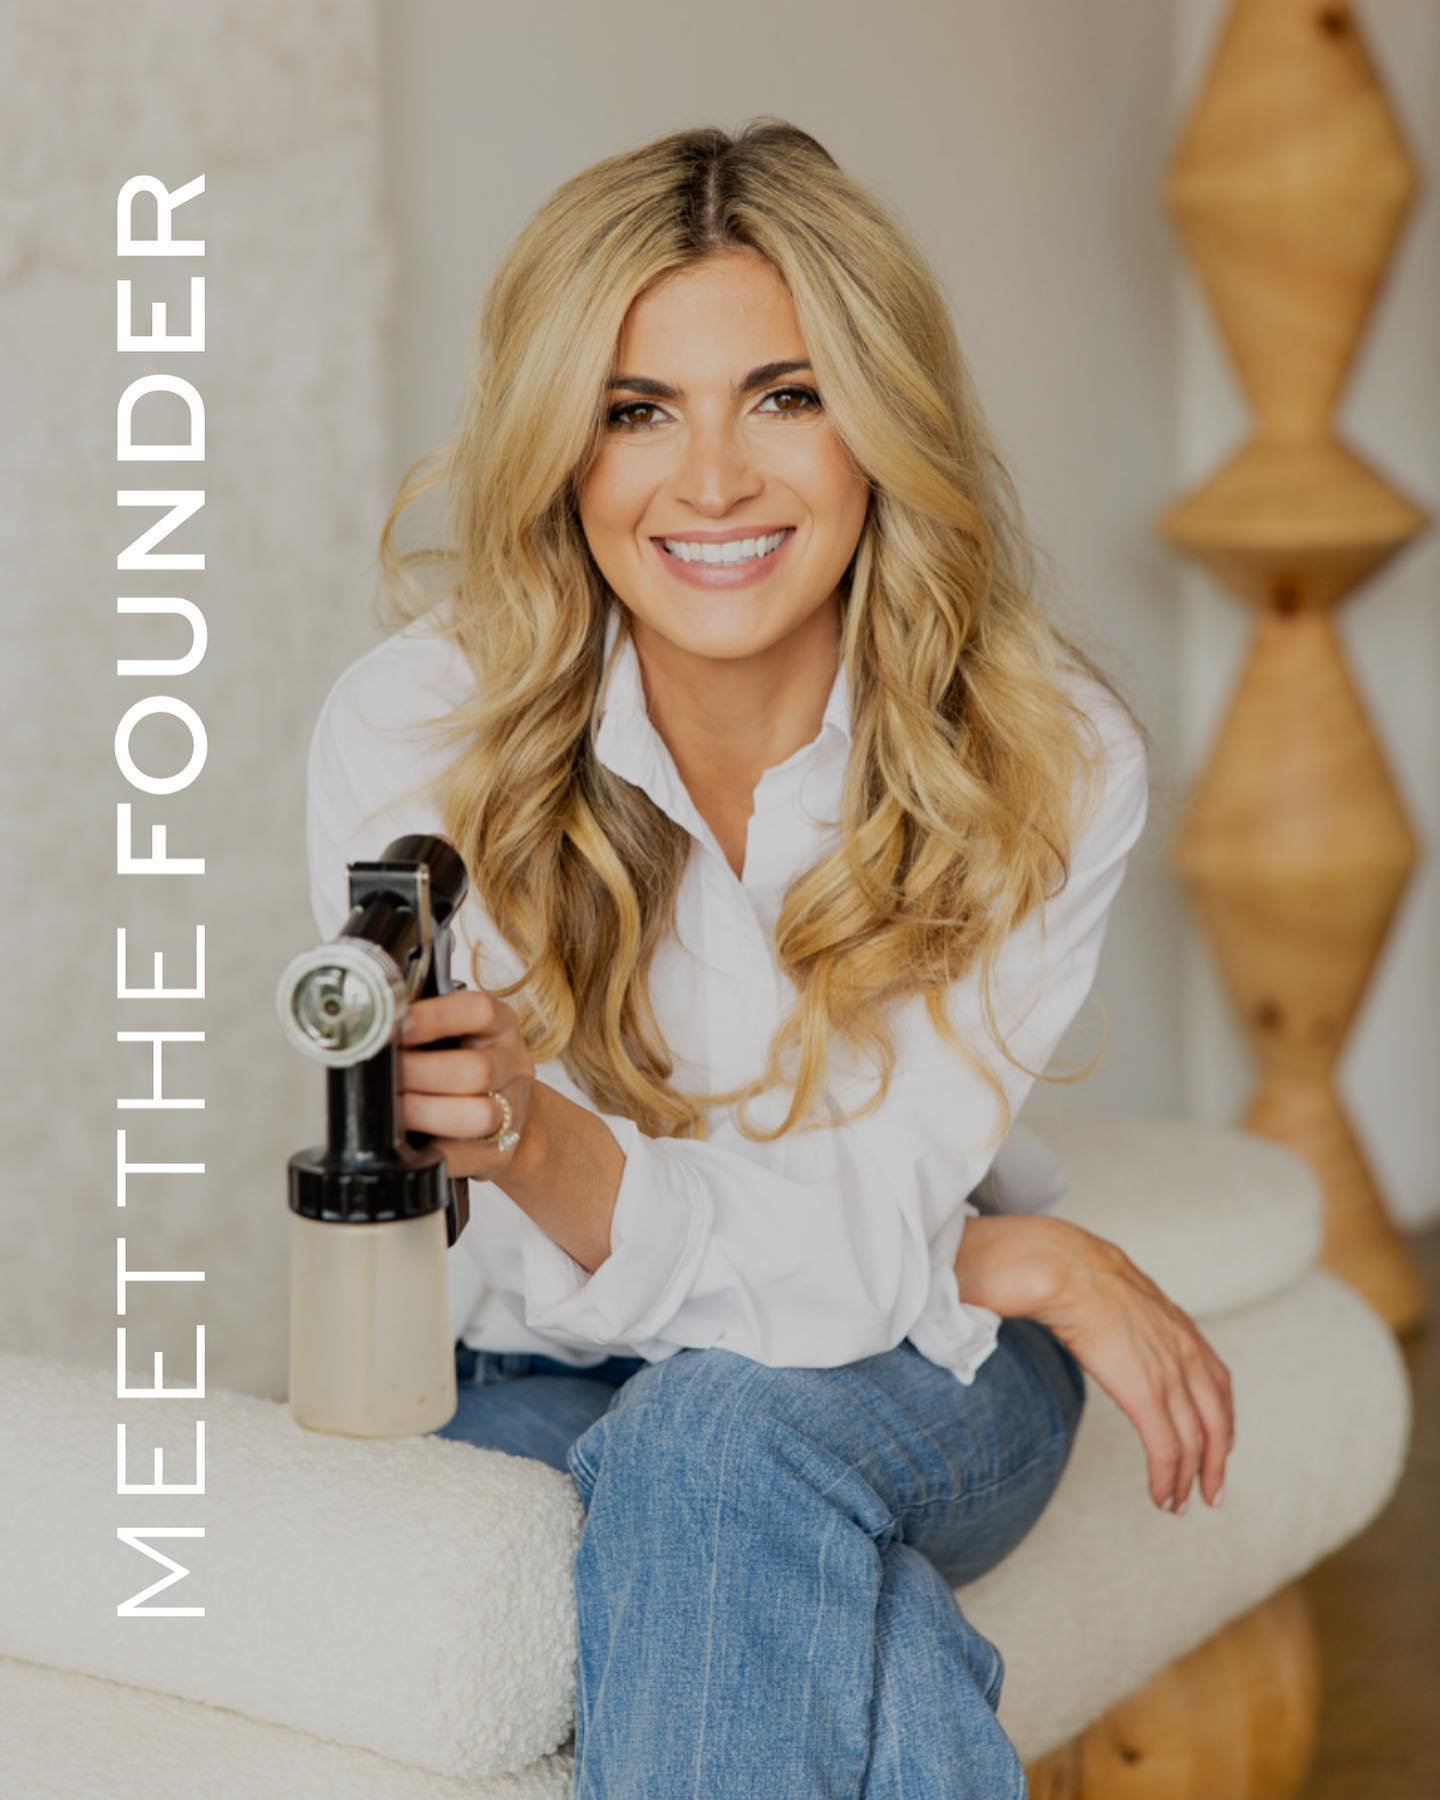 Meet Alexa, the owner/founder of Bronze Me Baby and creator of our self tanning product line, Bronzed Body! ☀️

In 2014, after trading in her farm upbringing to pursue a life of fun in the sun, Alexa started spray tanning friends out of my Santa Moni